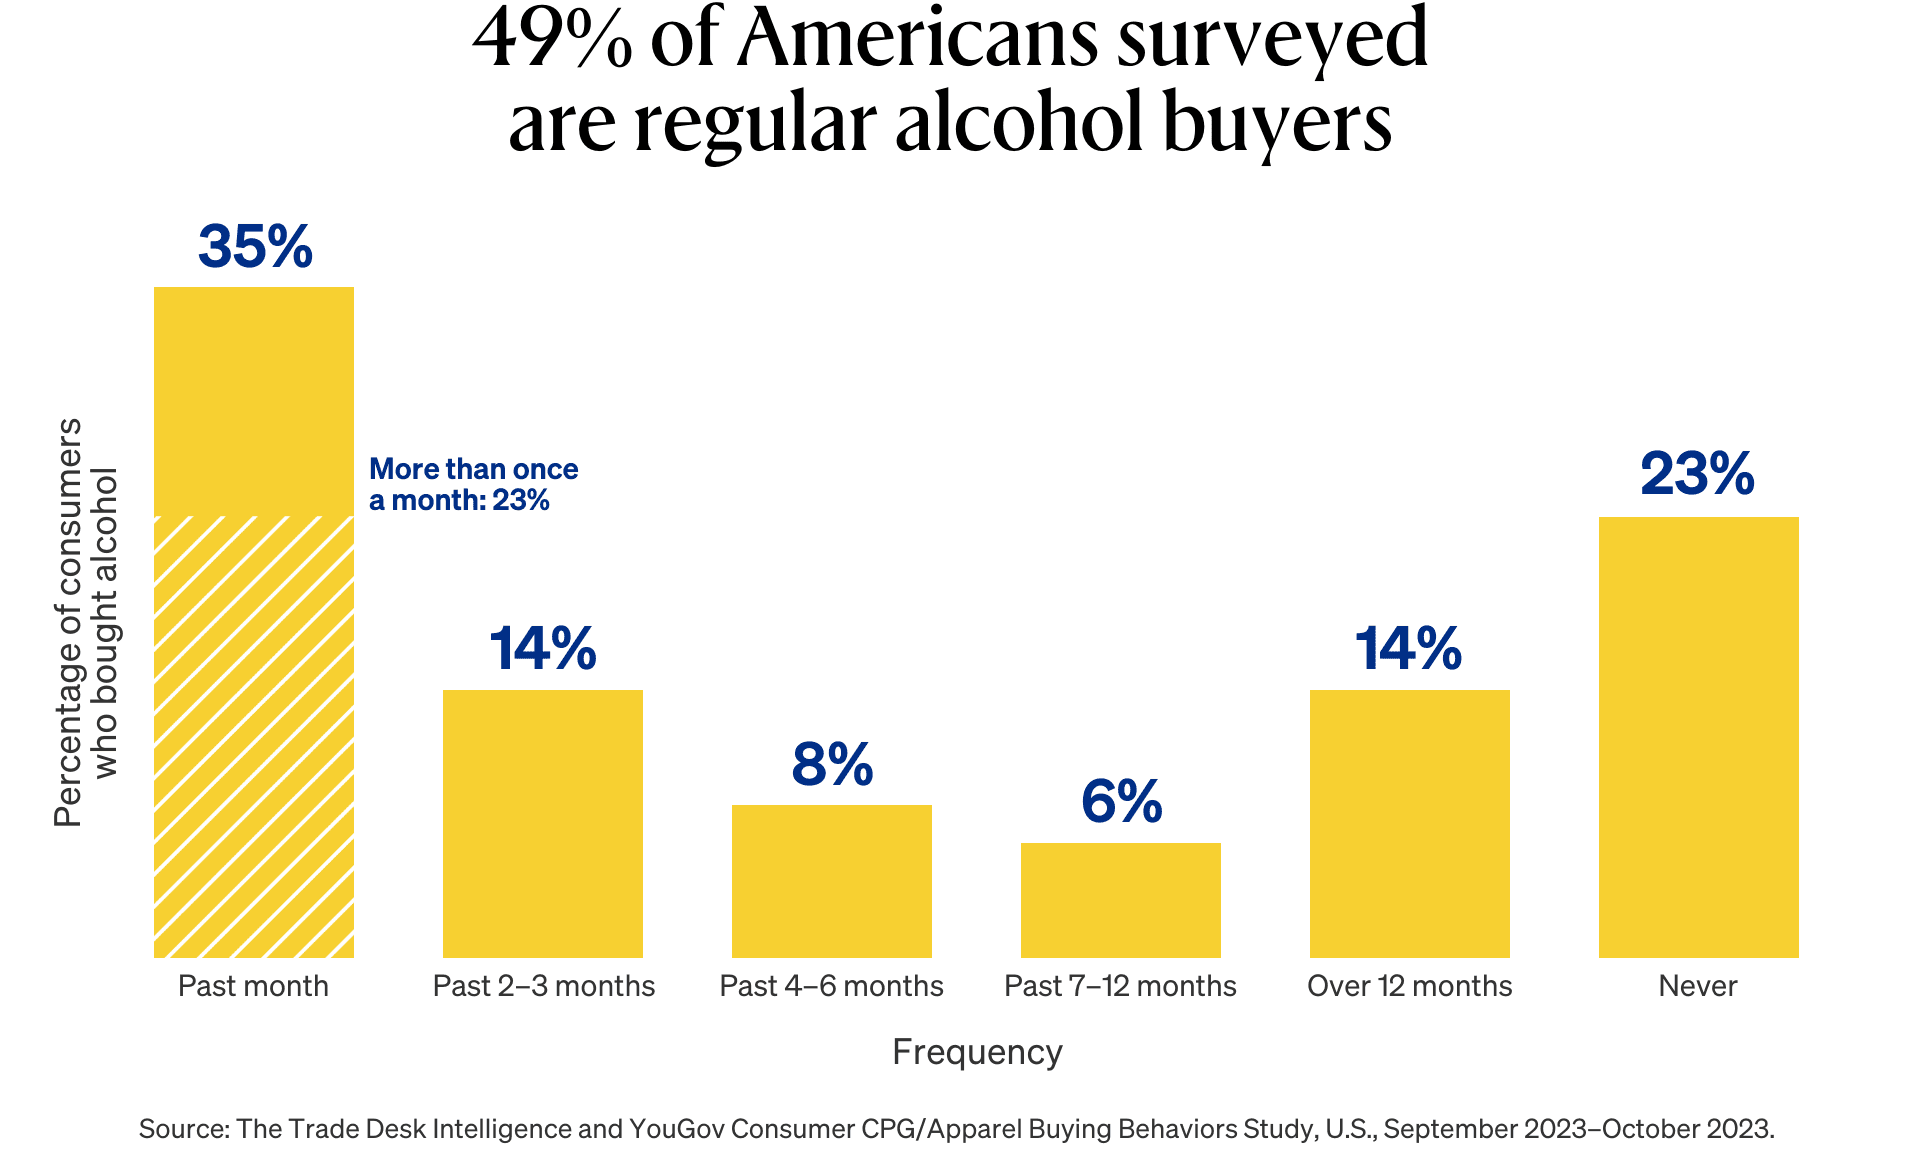 Graph showing 49% of Americans surveyed are regular alcohol buyers.